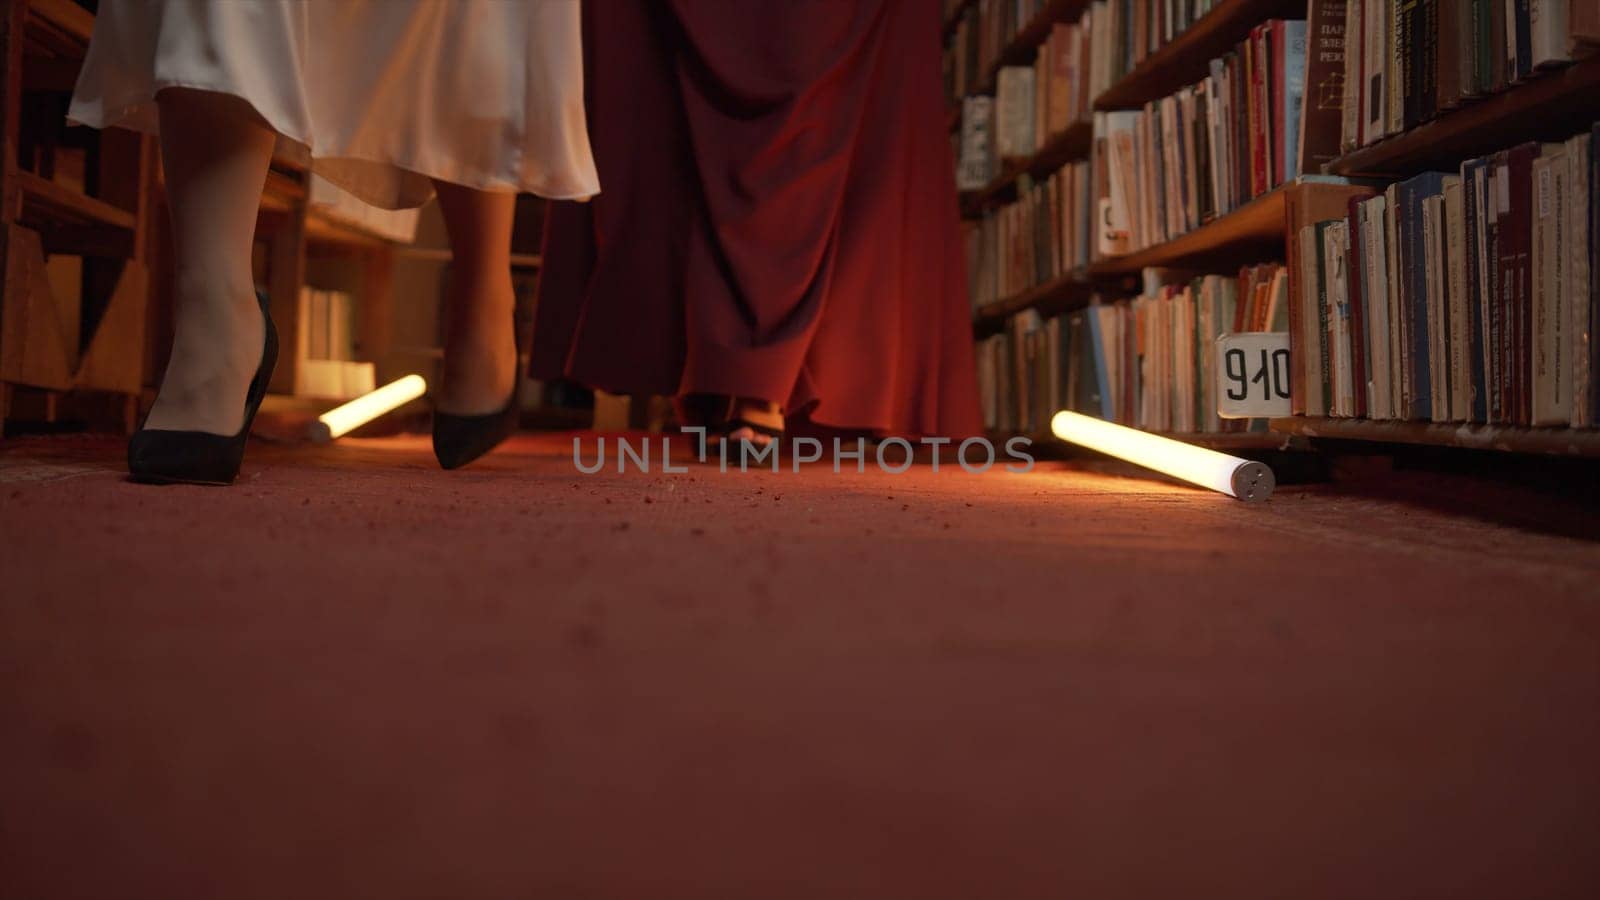 Women are mysteriously walking in library. Stock footage. Secret sorority in night library. Elegant women mysteriously gather in night library with flashing light by Mediawhalestock